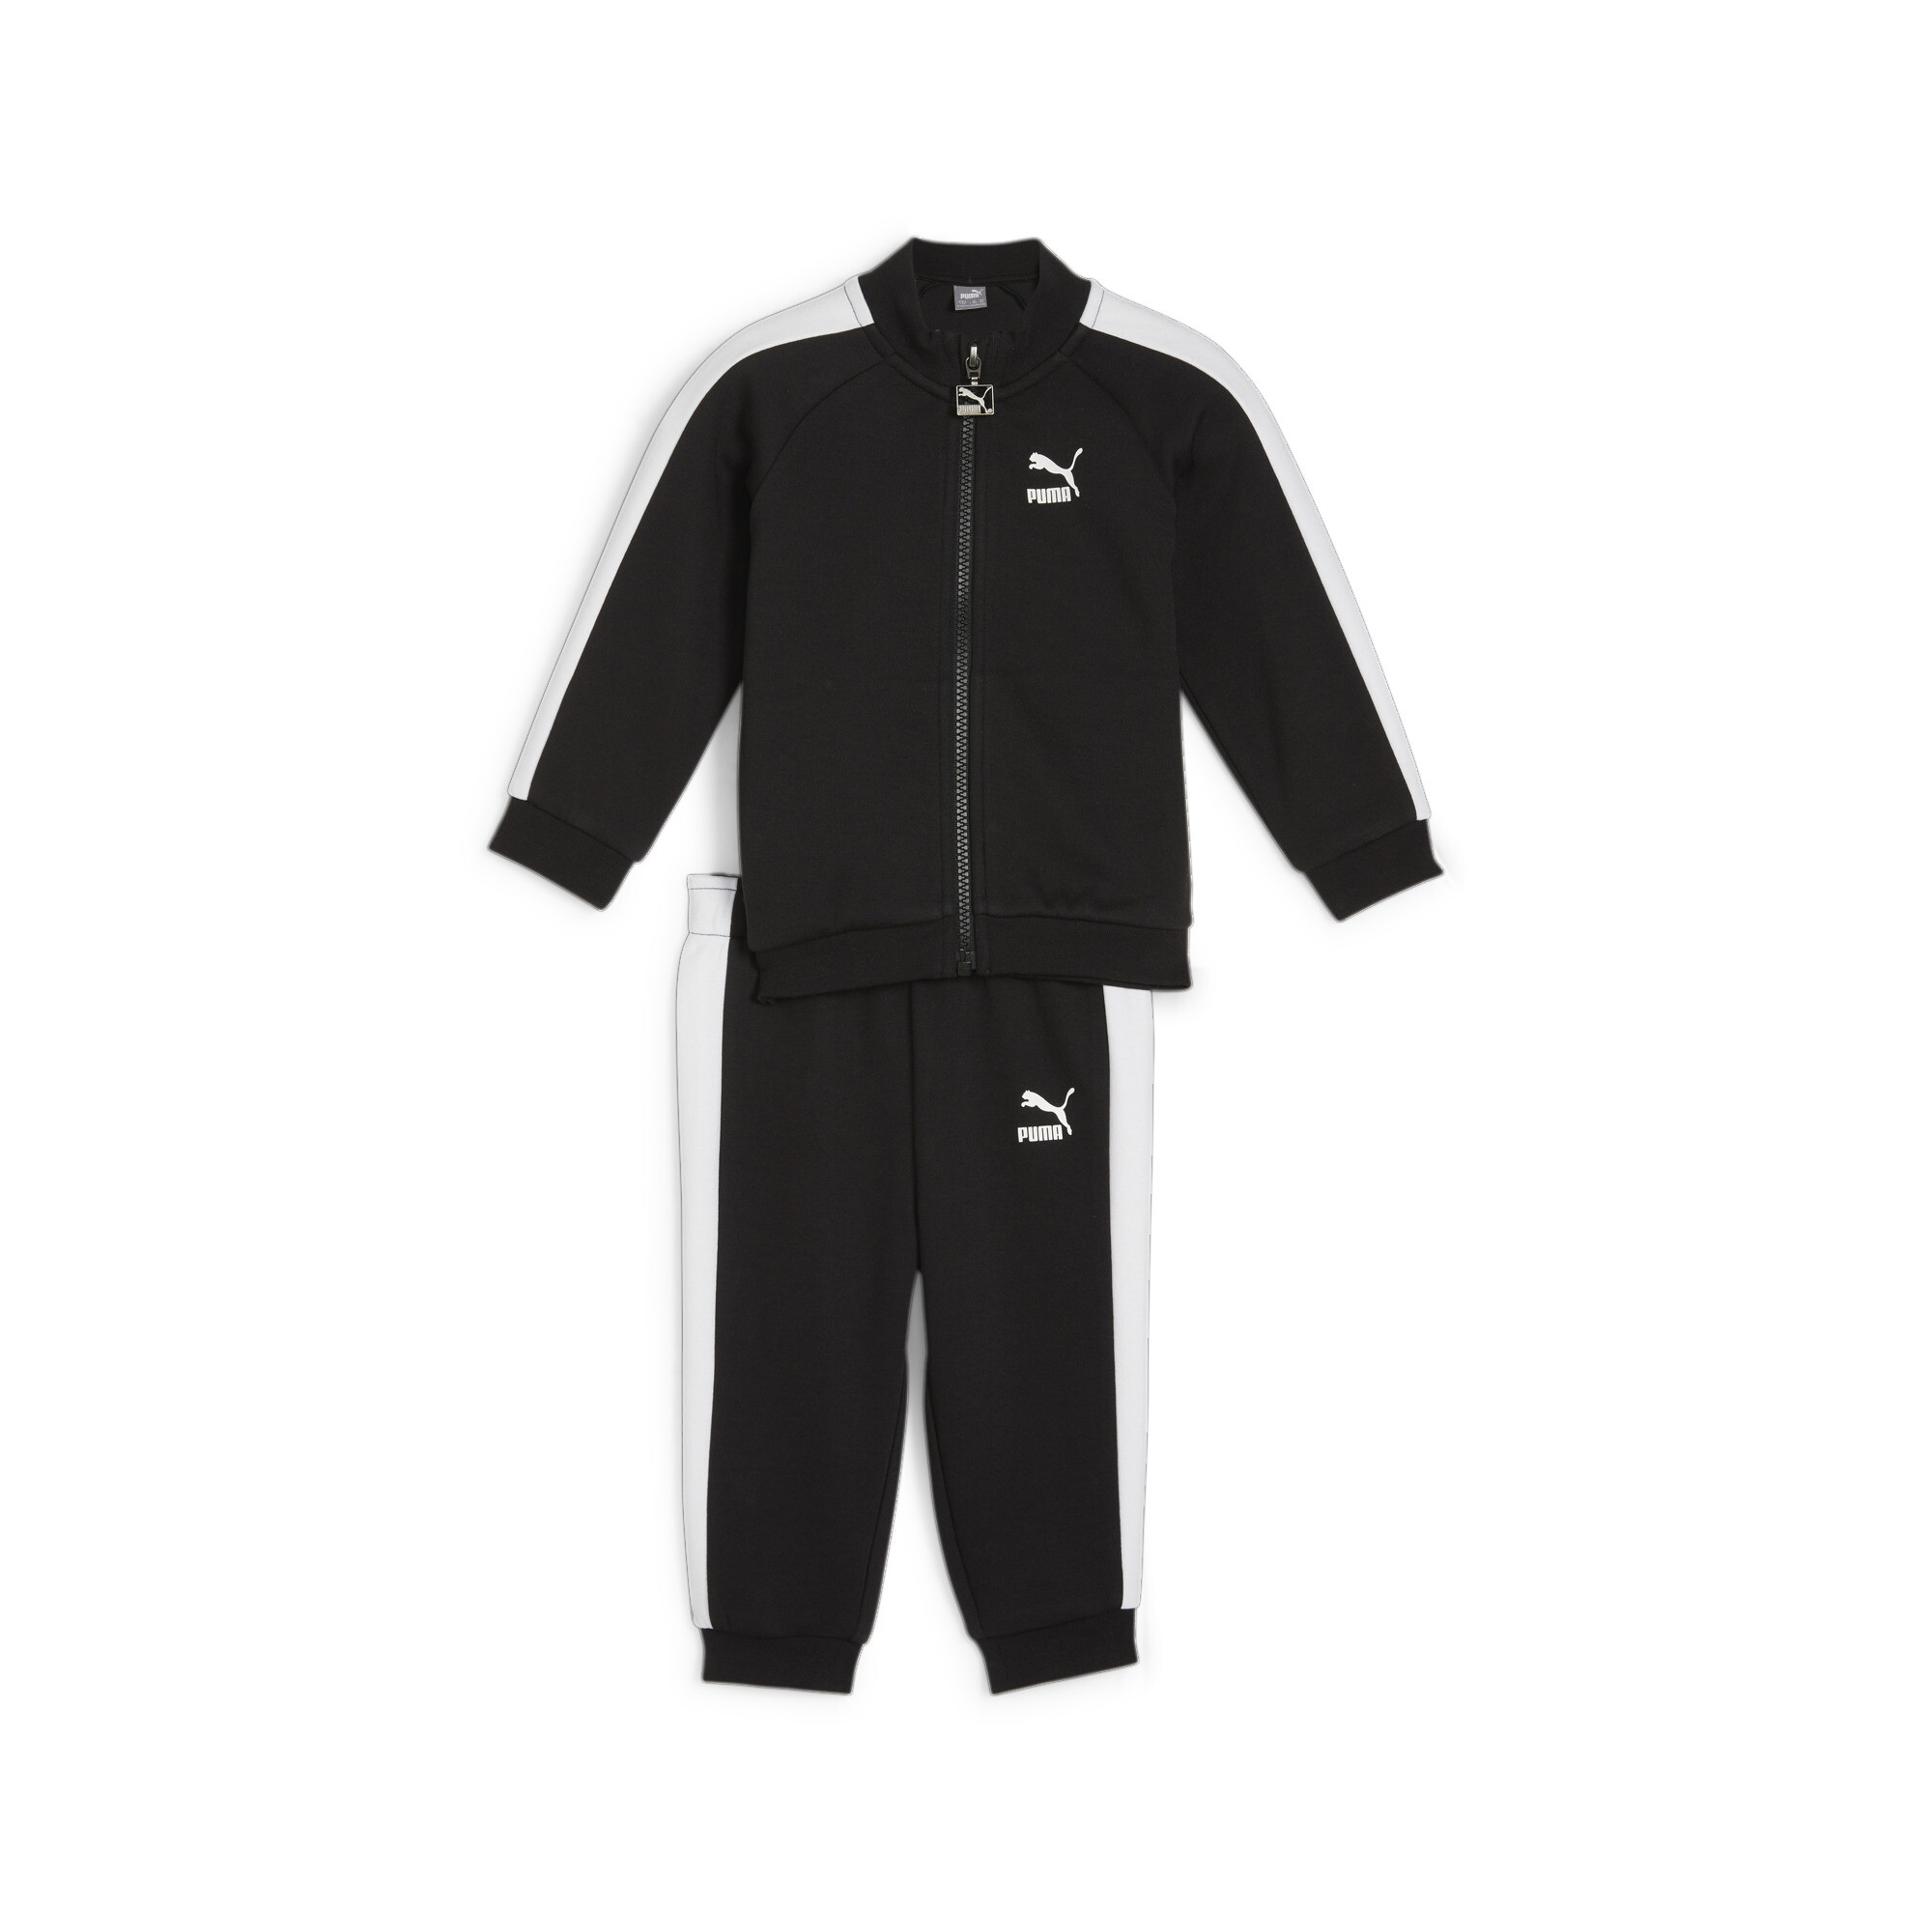 Kids' PUMA MINICATS T7 ICONIC Baby Tracksuit Set In Black, Size 12-18 Months